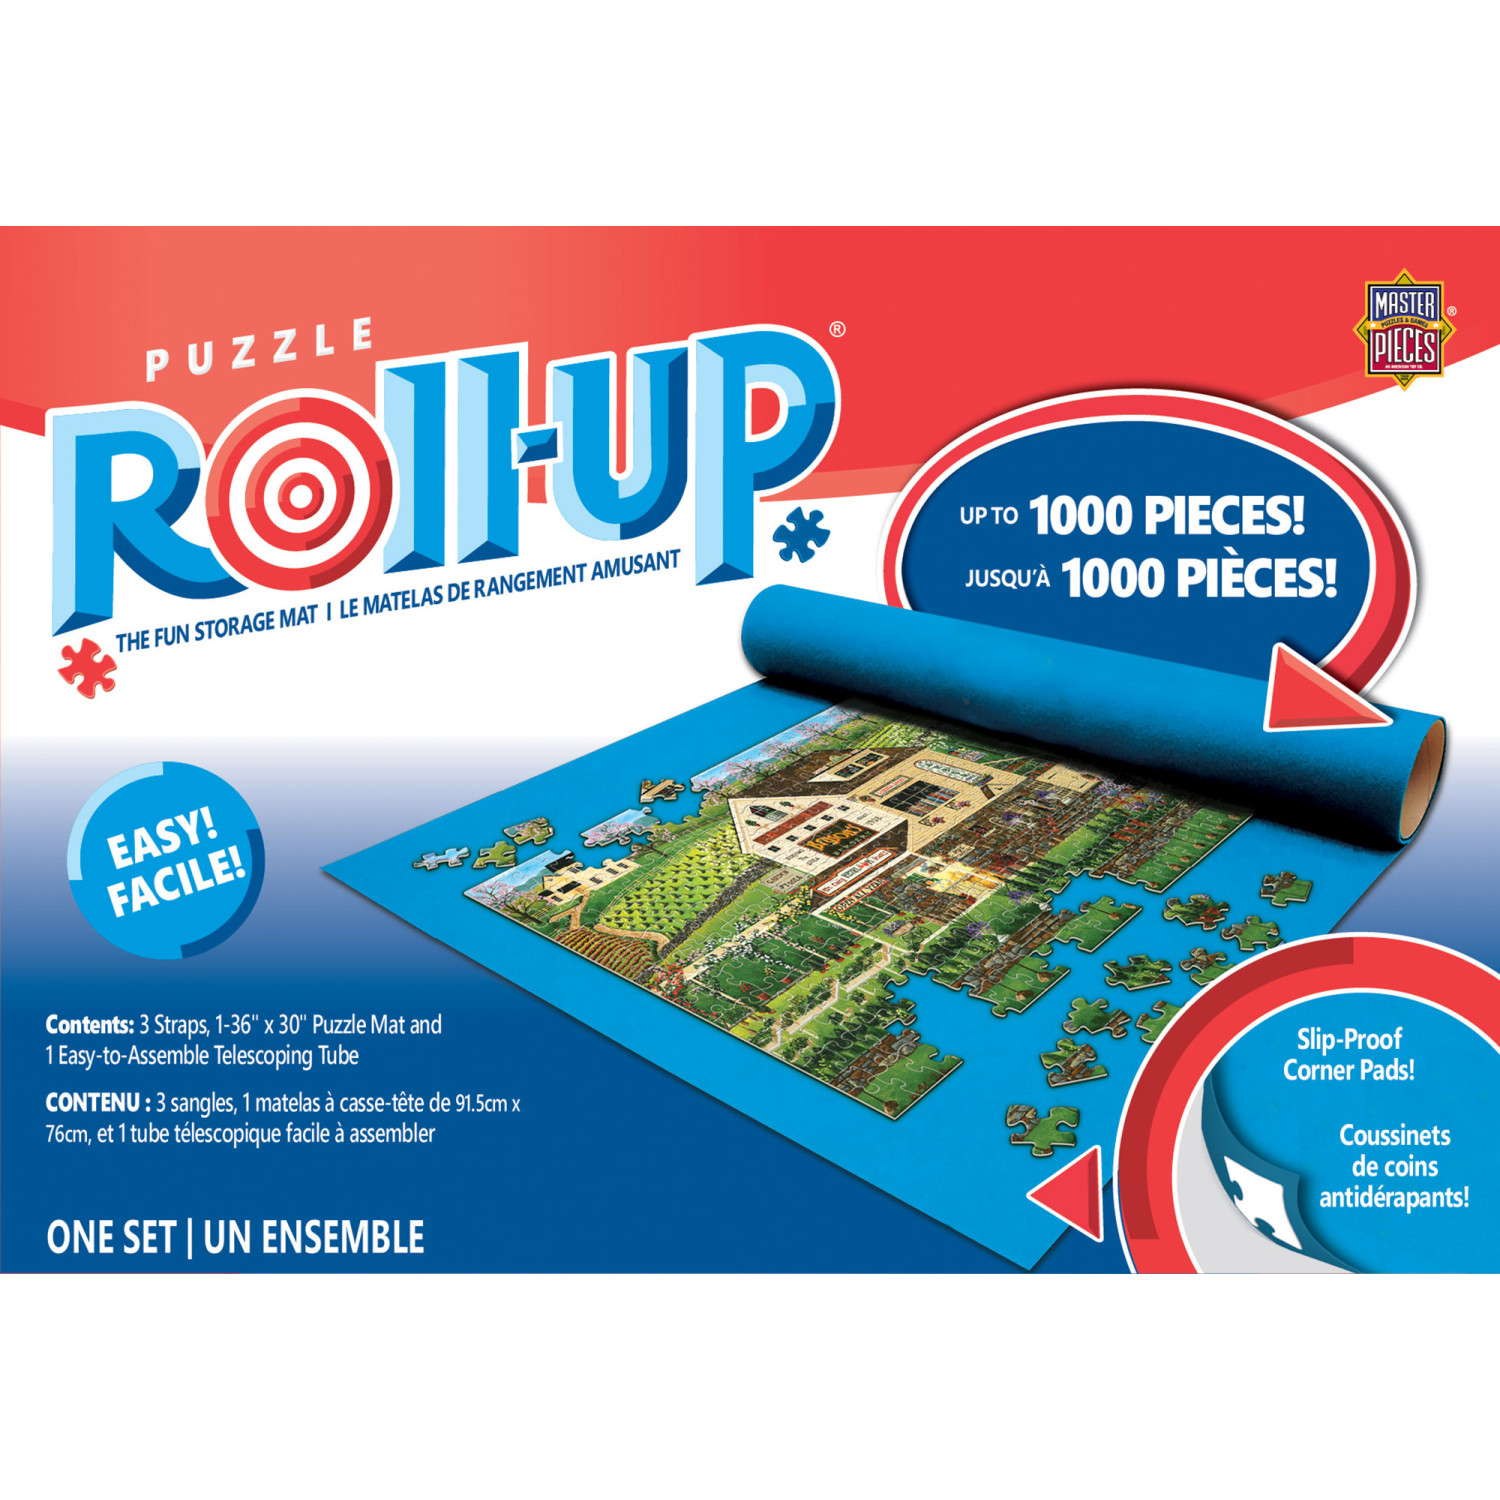 MasterPieces Accessories - Jigsaw Puzzle Roll-Up Mat & Stow Box - 36"x30" - image 3 of 5